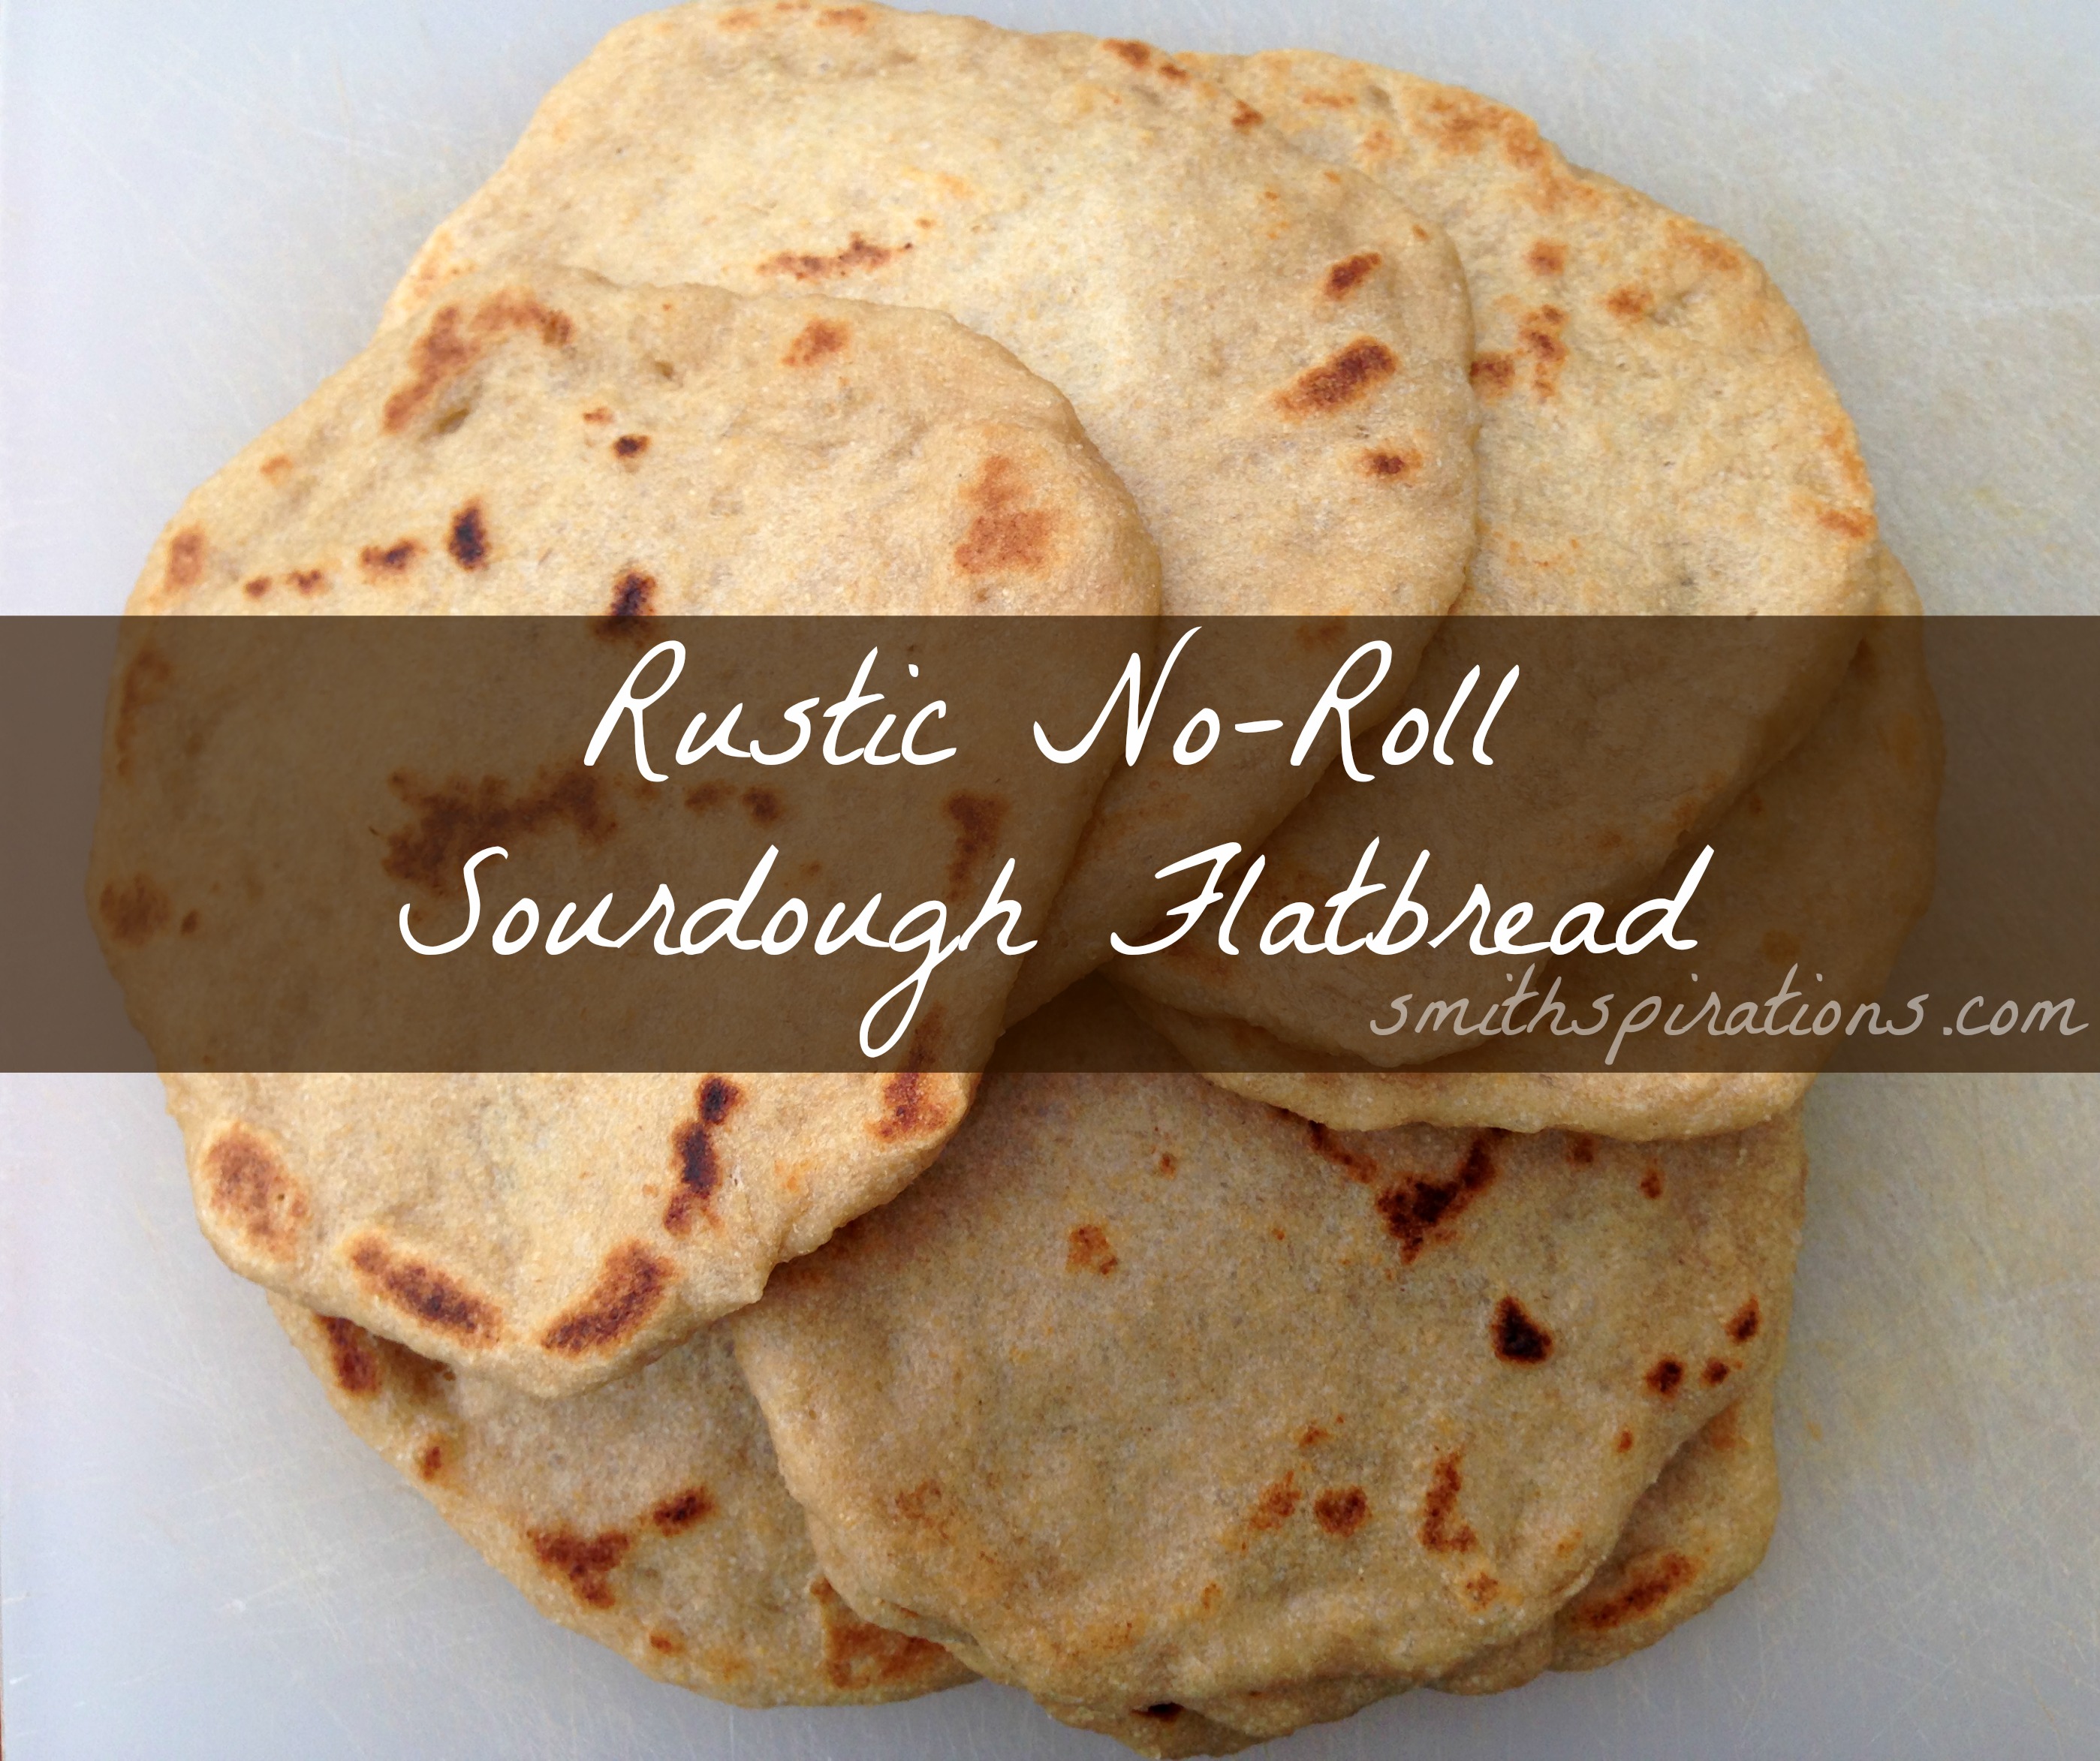 Rustic No-Roll Sourdough Flatbread from the Grain Mill Wagon, by Kristen @ Smithspirations.com